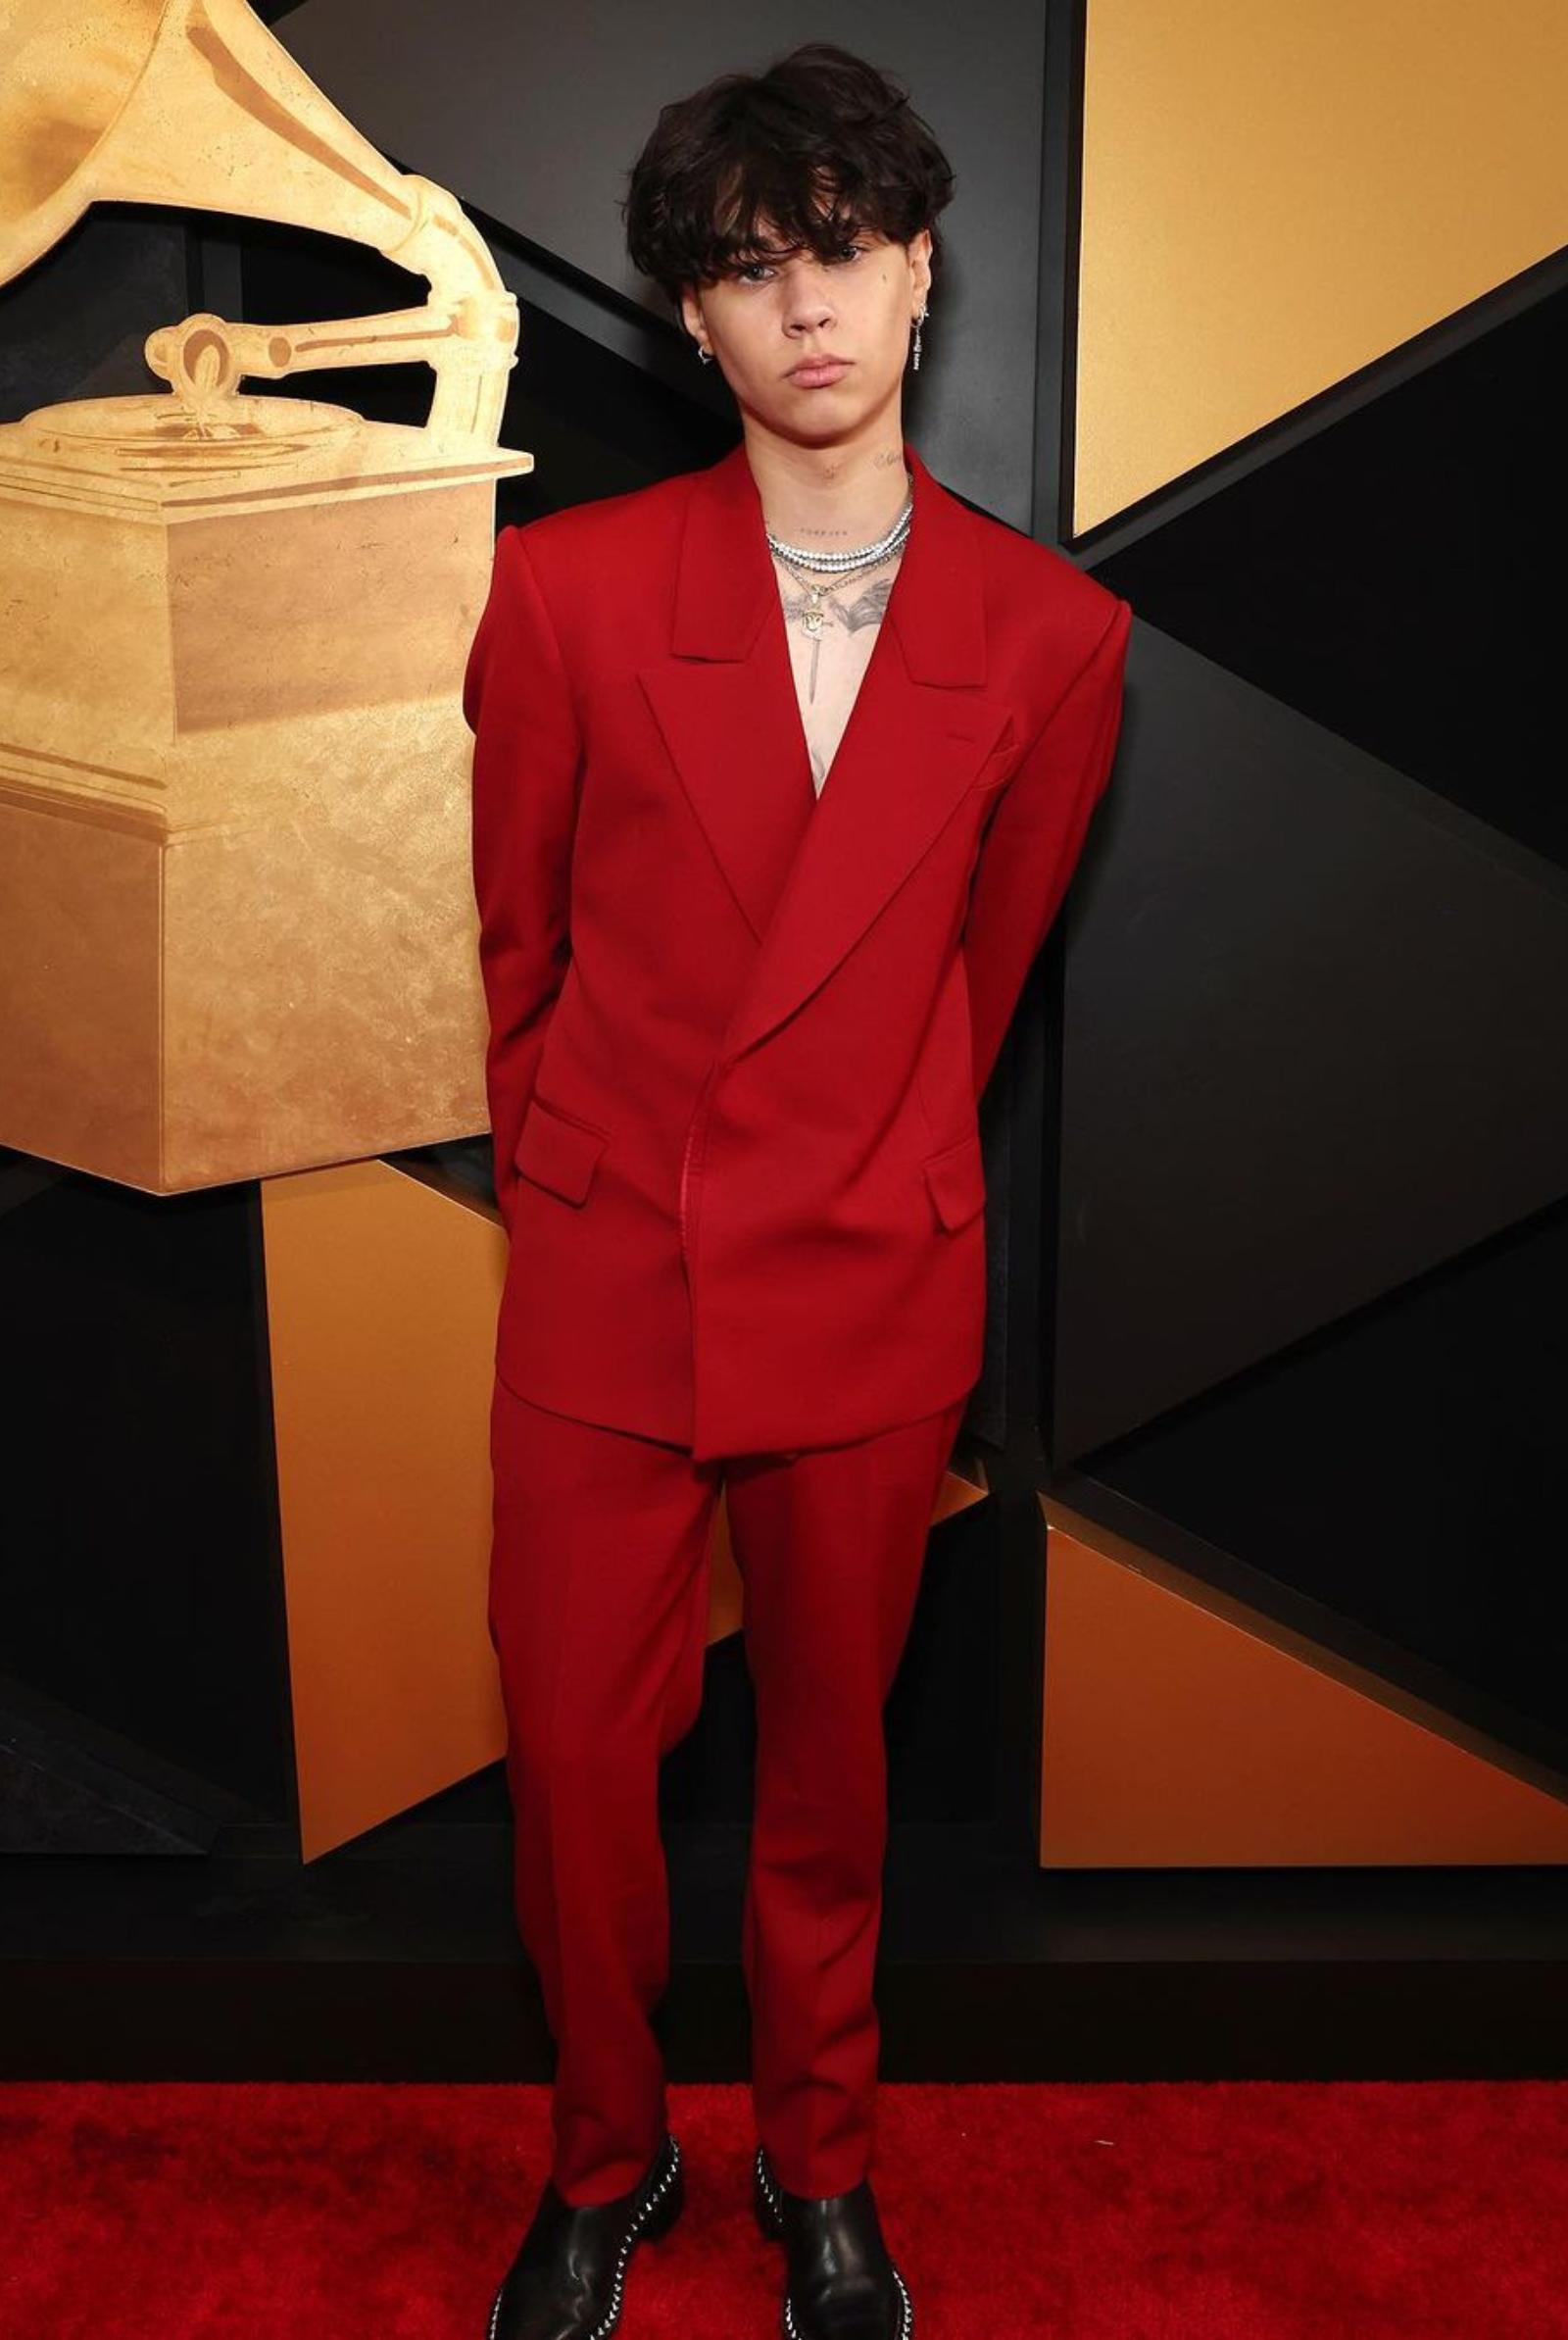 Commanding attention with ease, Landon Barker shines in a red number